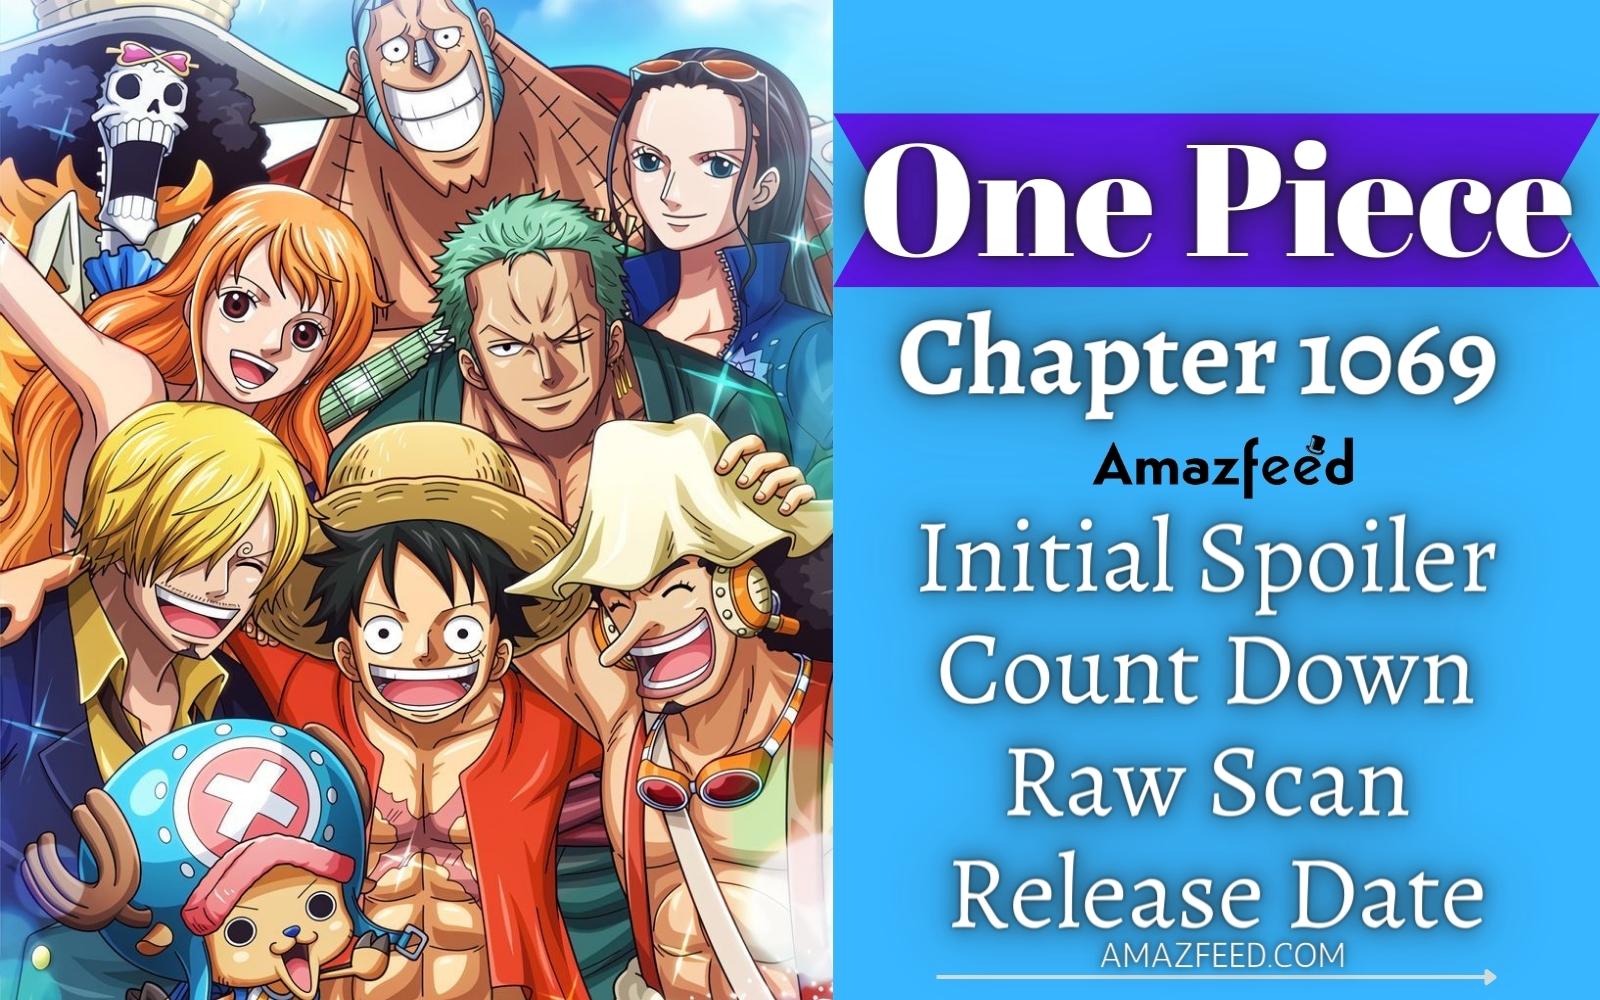 One Piece Chapter 1069 Initial Spoilers, Count Down, English Raw Scan, Release Date, & Everything You Want to Know